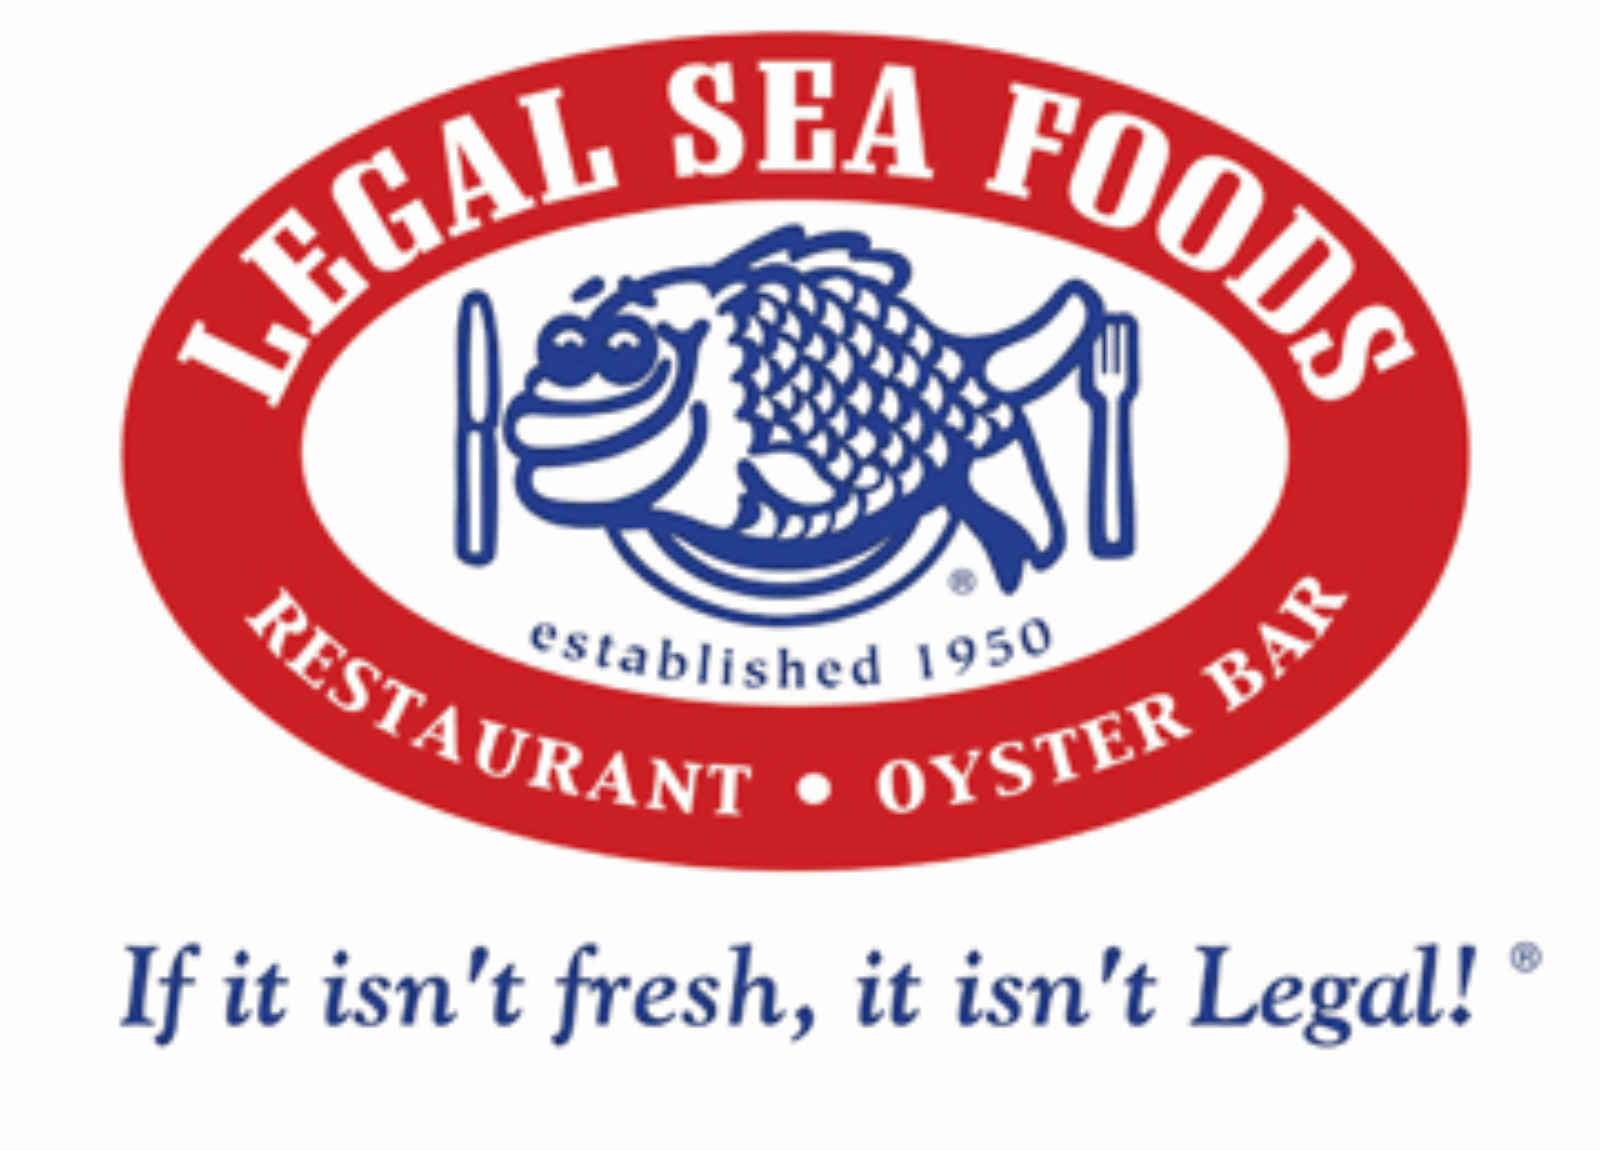 Legal Seafoods